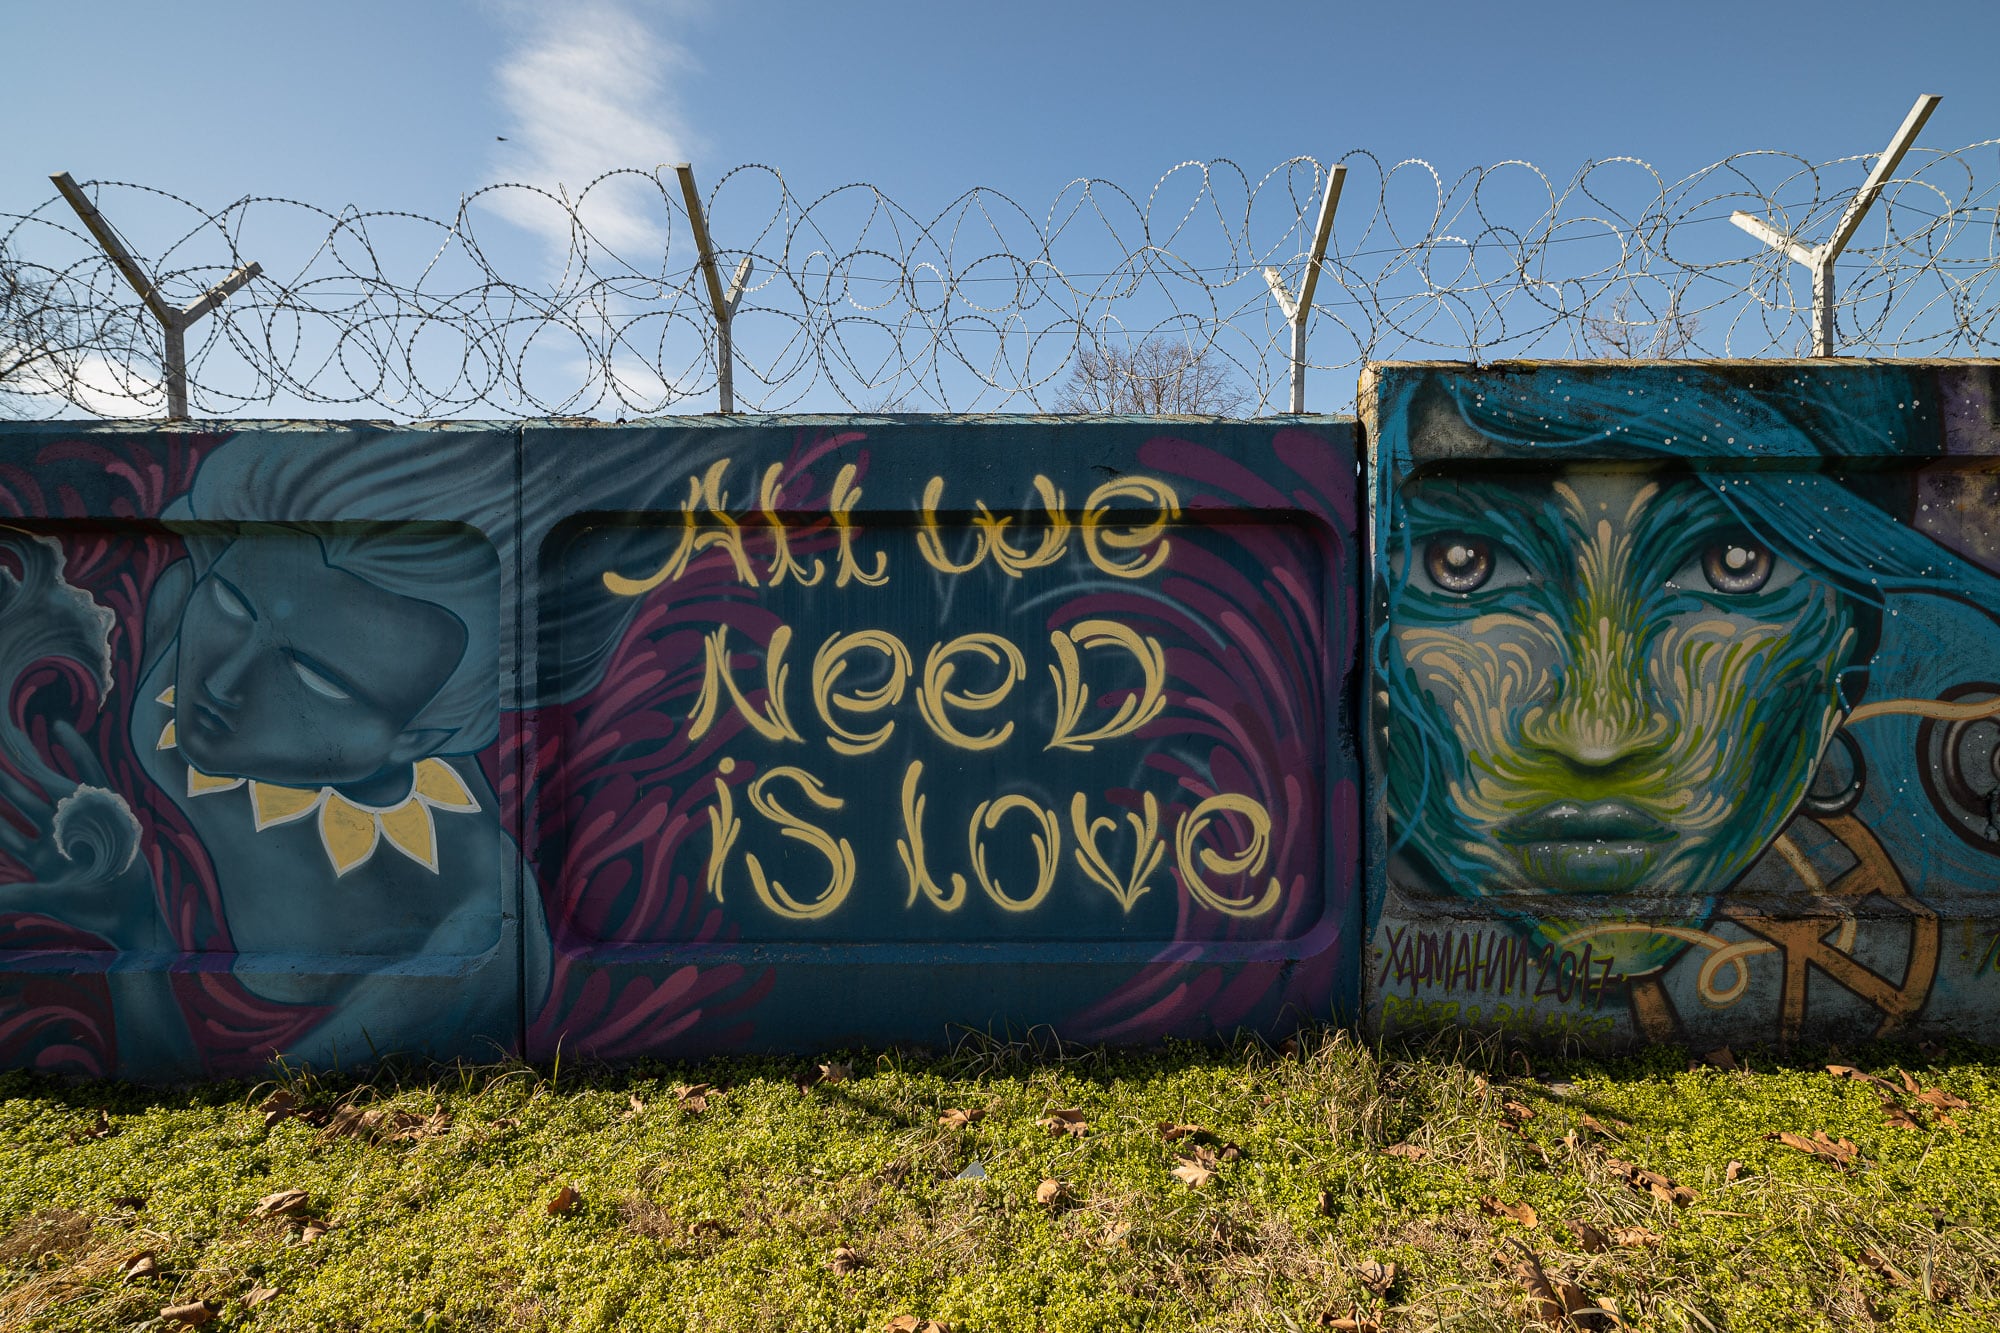 All We Need Is Love graffito at the Harmanli Refugee Camp